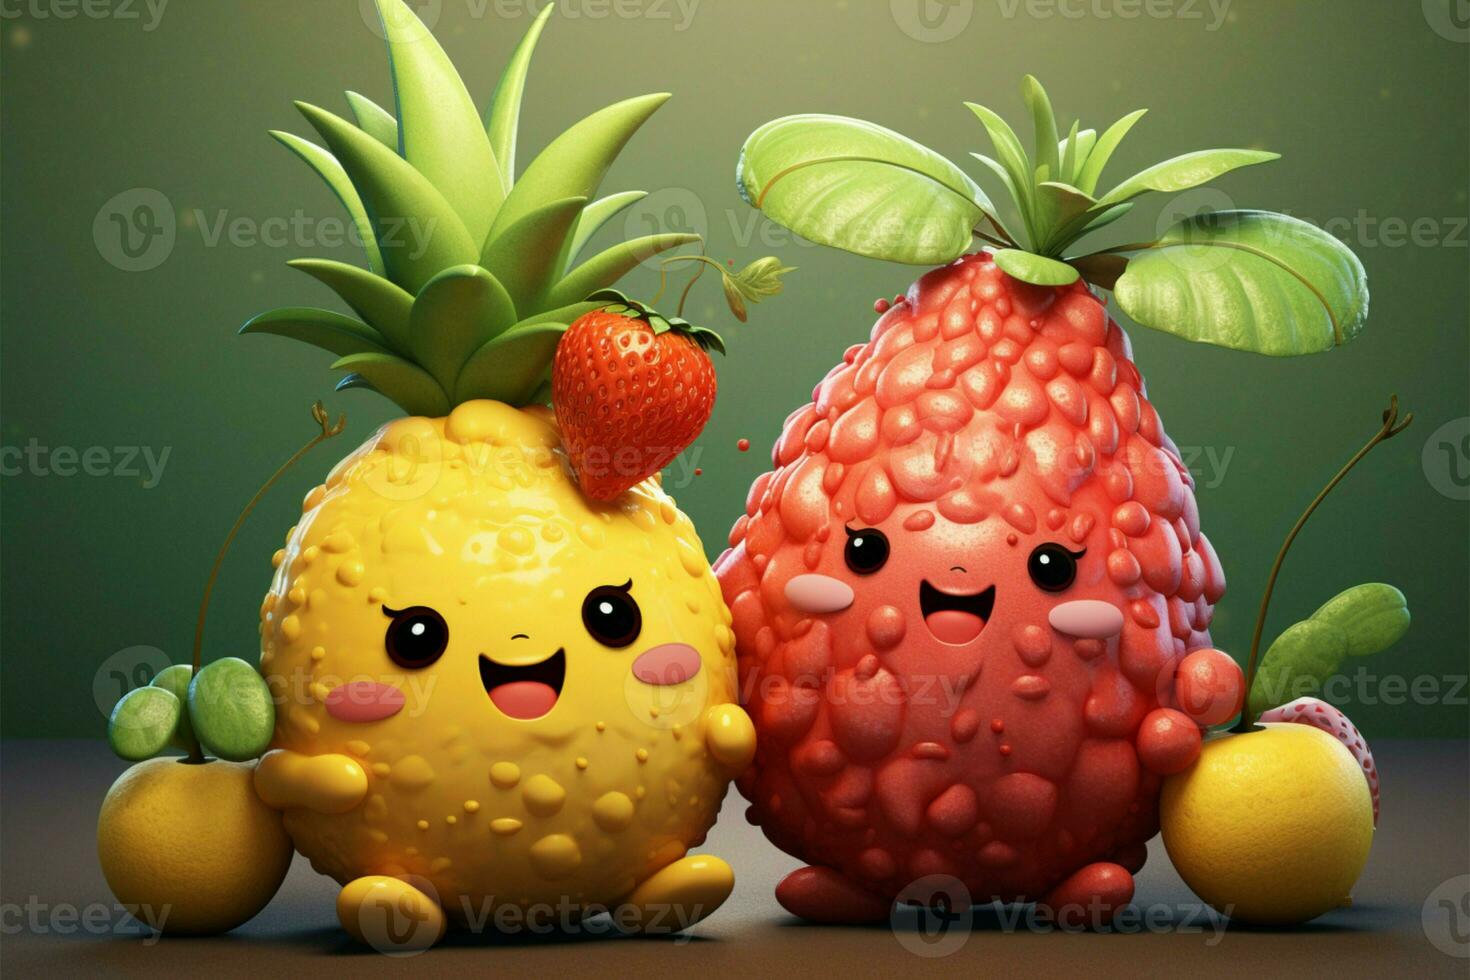 Fruits depicted in an adorably cute manner, evoking smiles and warmth AI Generated photo